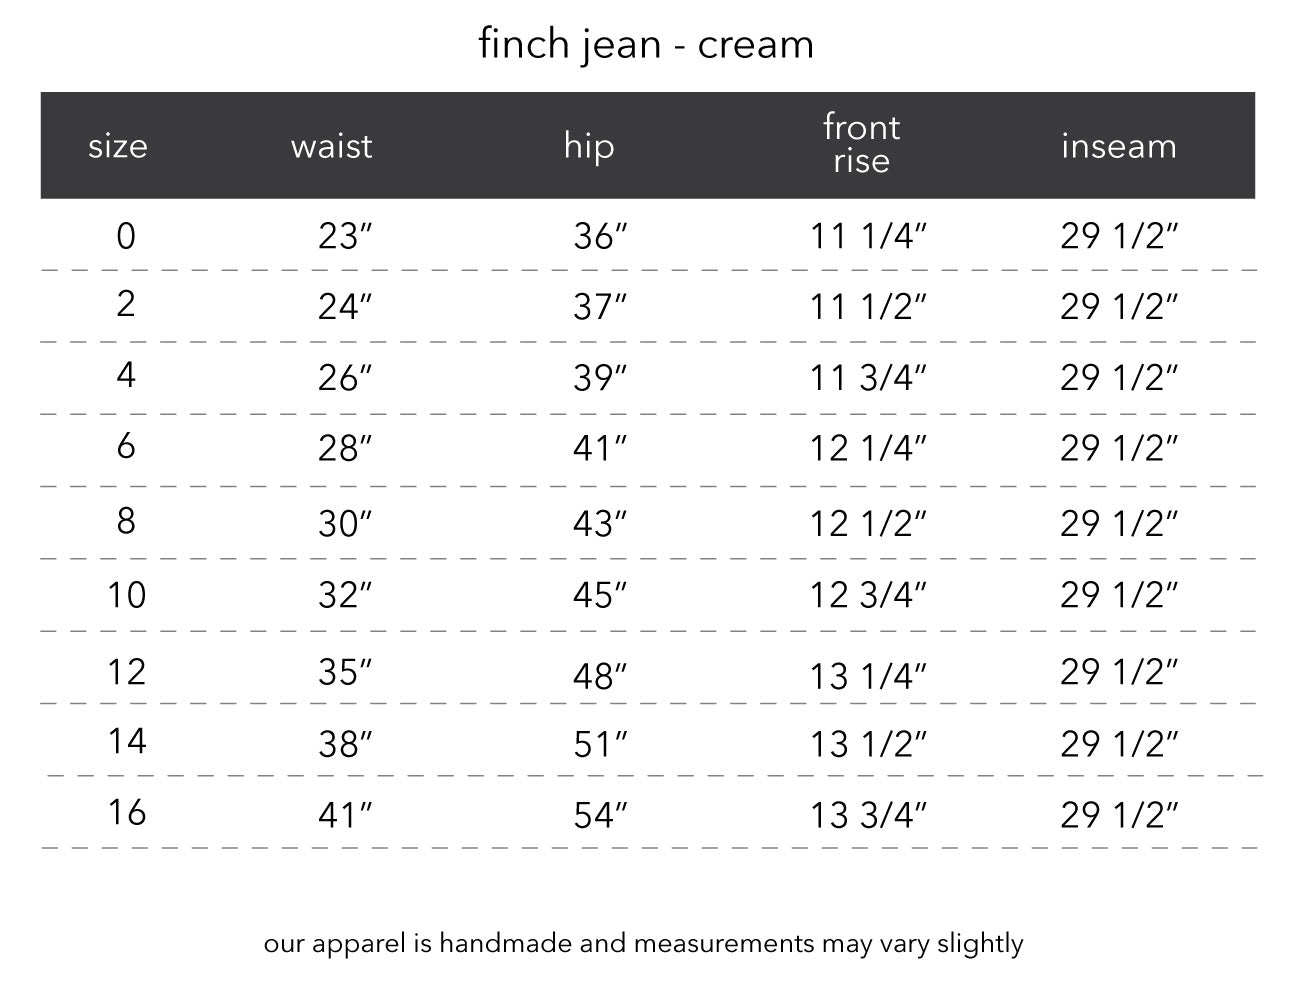 FINCH JEAN - CREAM PRODUCT MEASUREMENTS – esby apparel